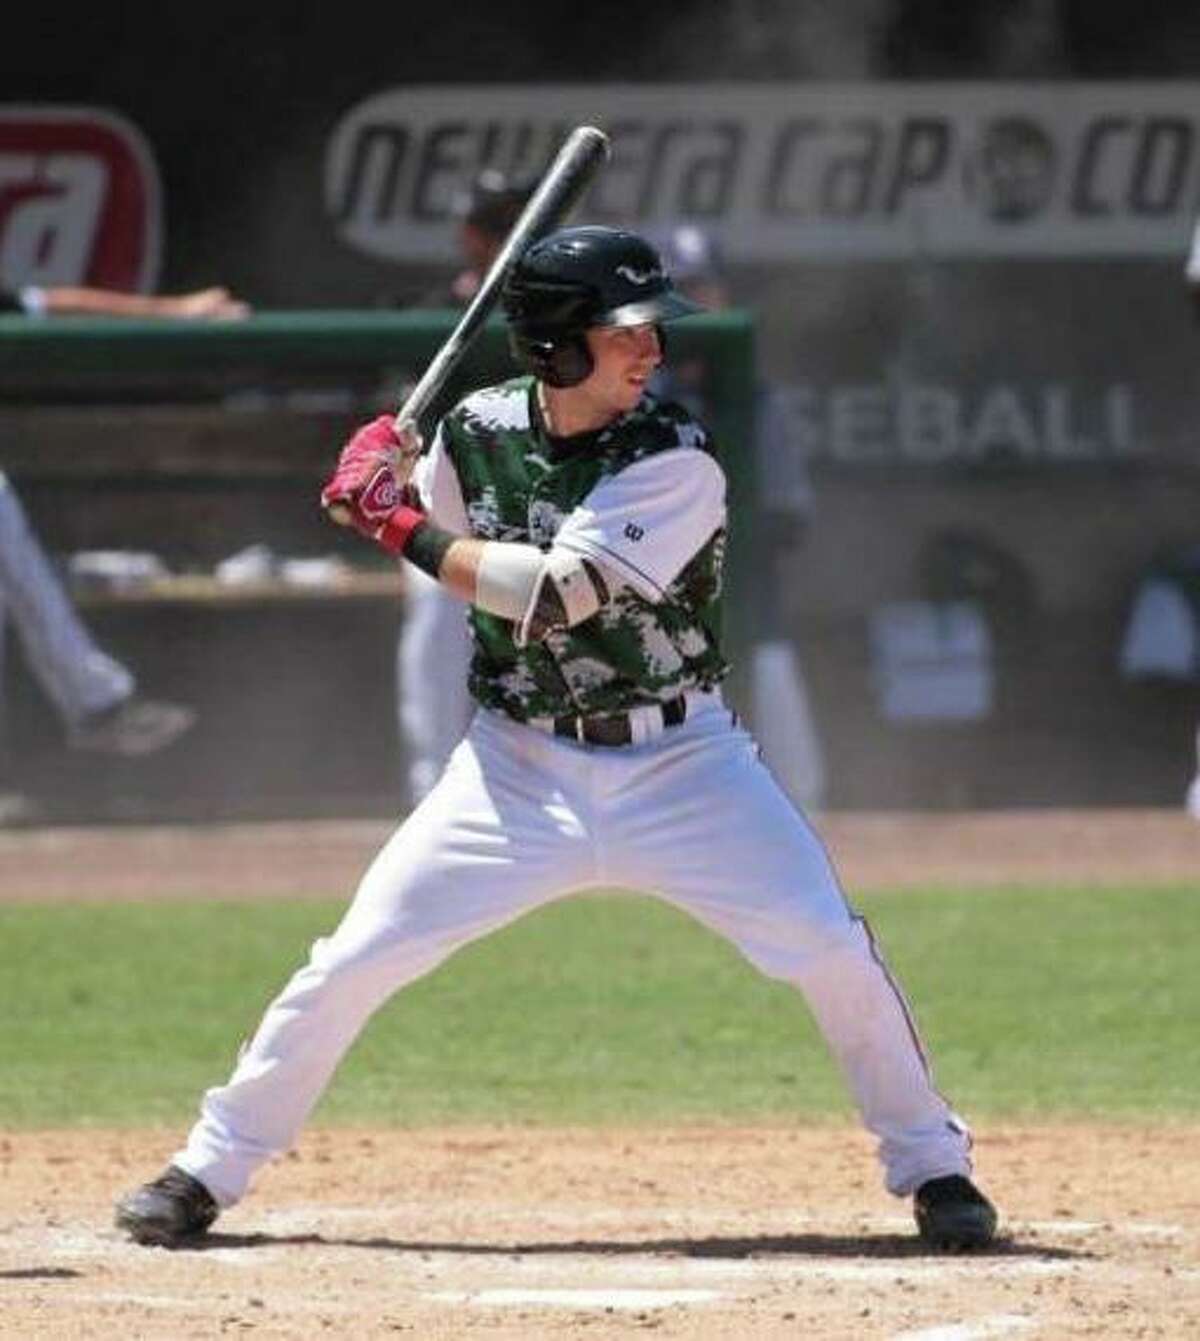 St. Joseph High grad Matt Batten hit .341 at High-A Lake Elsinore and is now playing for Triple-A El Paso in the Pacific Coast League.